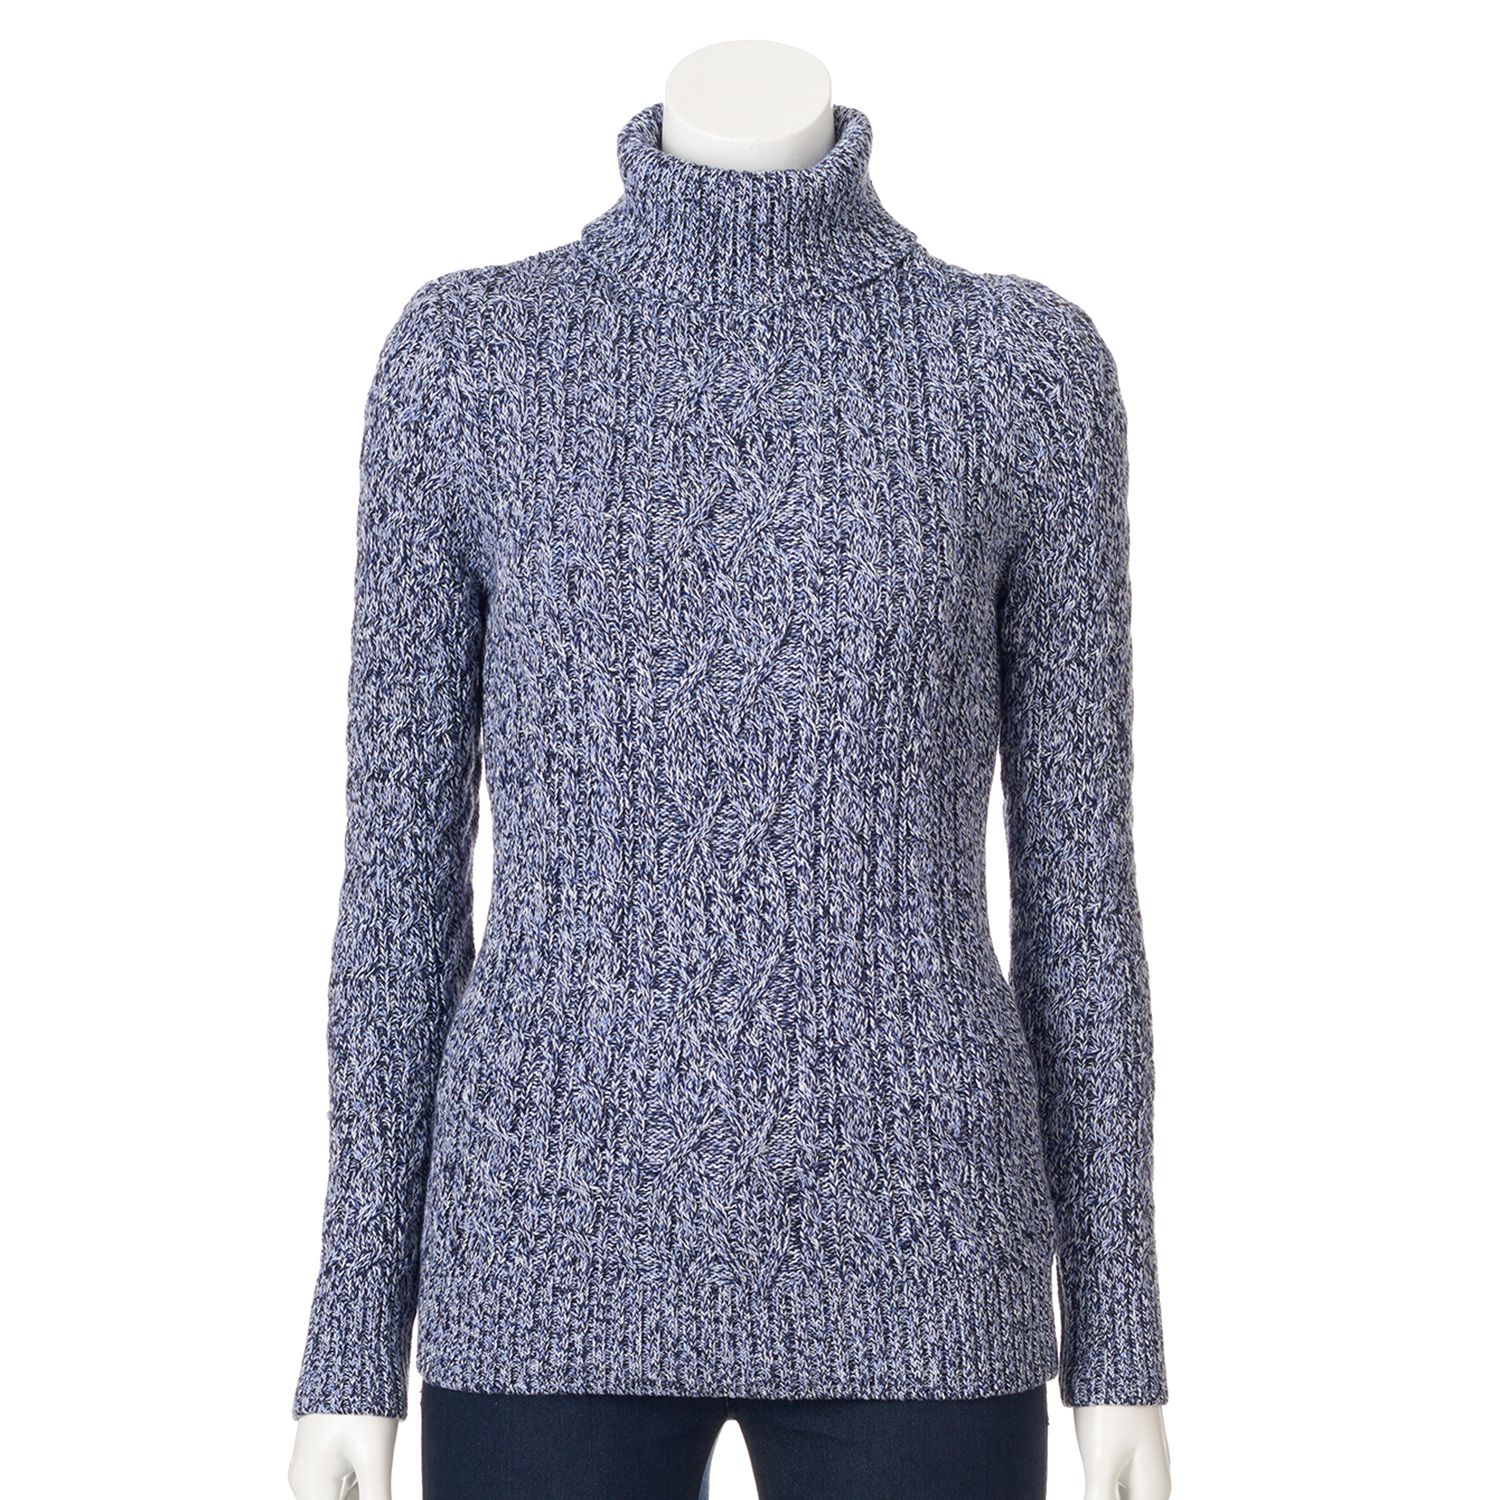 cable knit turtleneck sweater women's